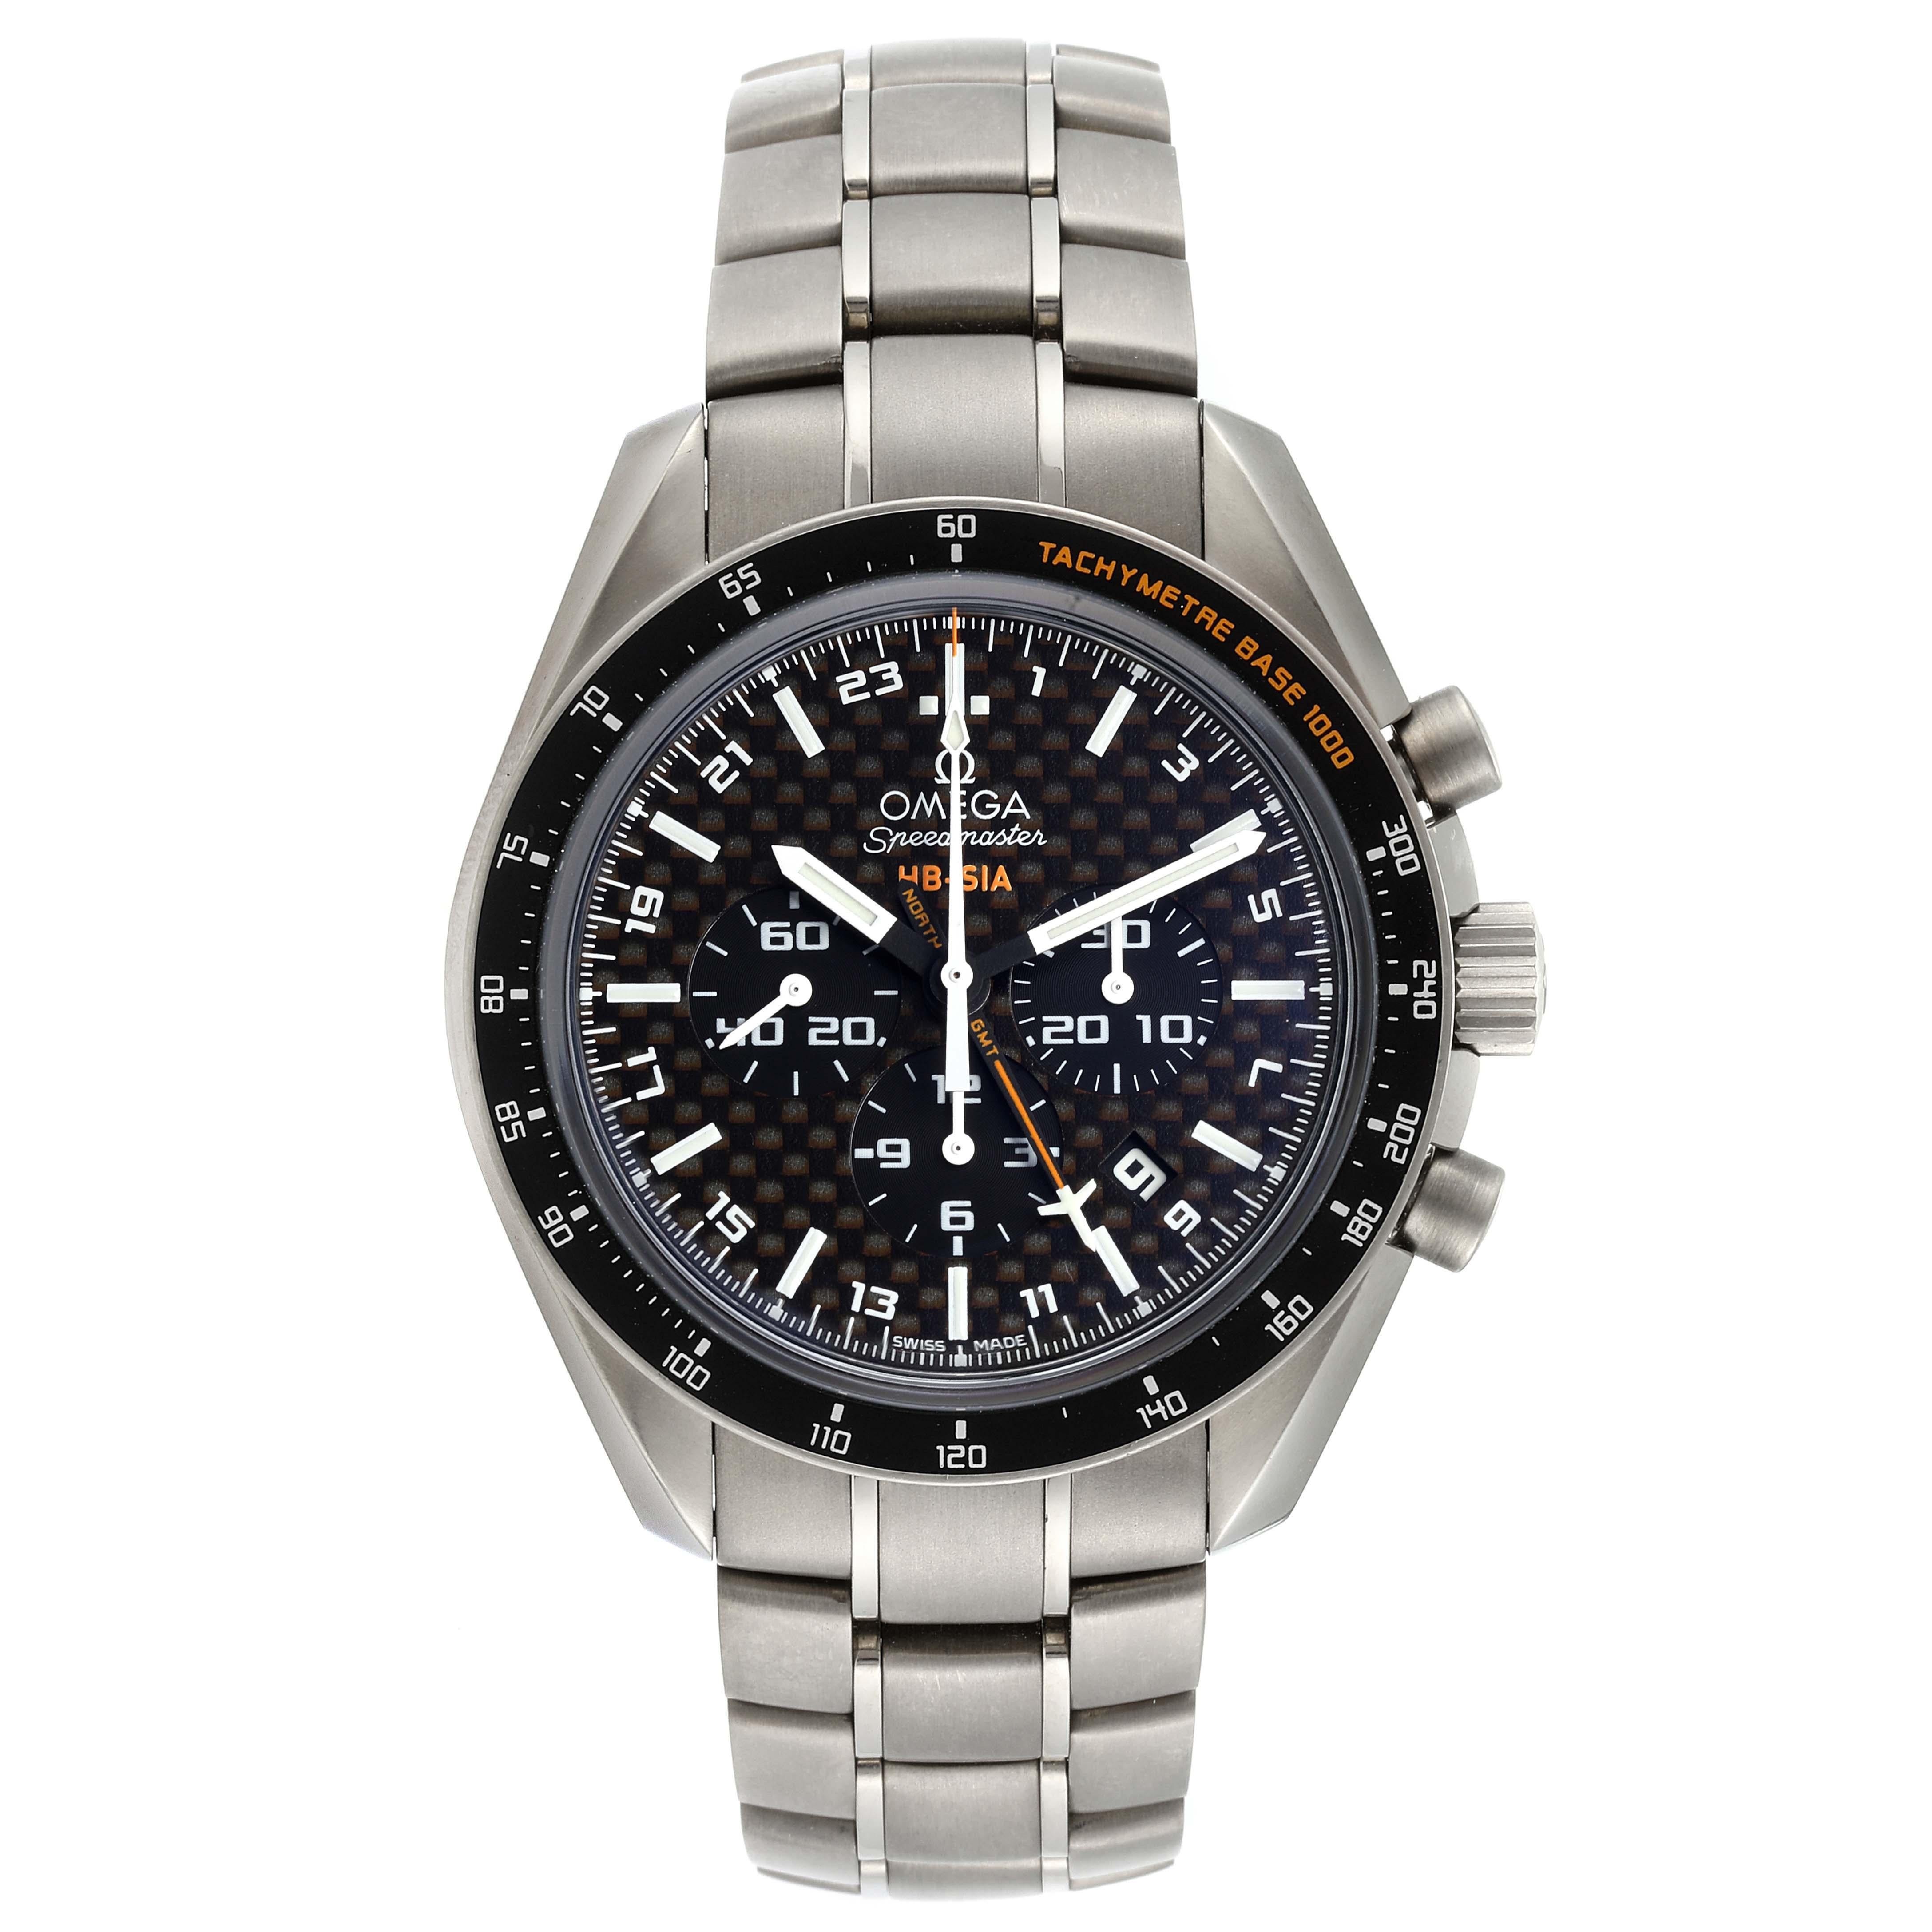 Omega Speedmaster HB-SIA GMT Titanium Watch 321.90.44.52.01.001 Box Card. Officially certified chronometer automatic self-winding movement. Titanium case 44.25 mm in diameter. Omega logo on a crown. Black bezel with tachimeter scale. Scratch